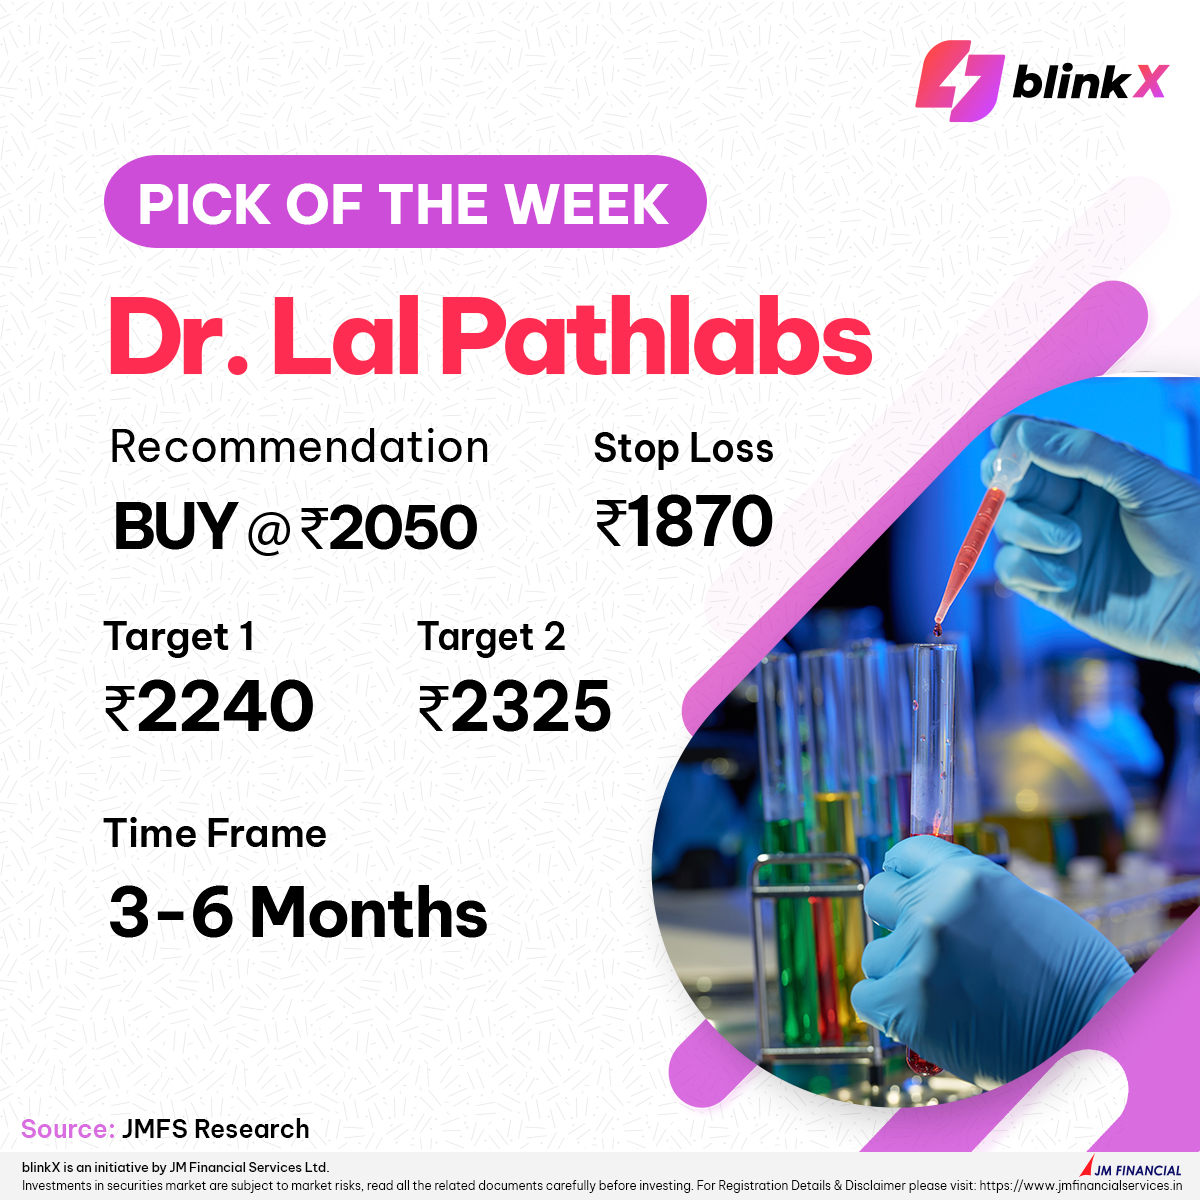 Pick of the week
BUY – Dr Lal Path Labs

#DrLalPathLabs #nifty50 #stocks #sensex #nifty #stockinfocus #stockmarketnews #sharemarketnews #stocks #sharemarketindia #investing #investor #blinkX #getblinkX